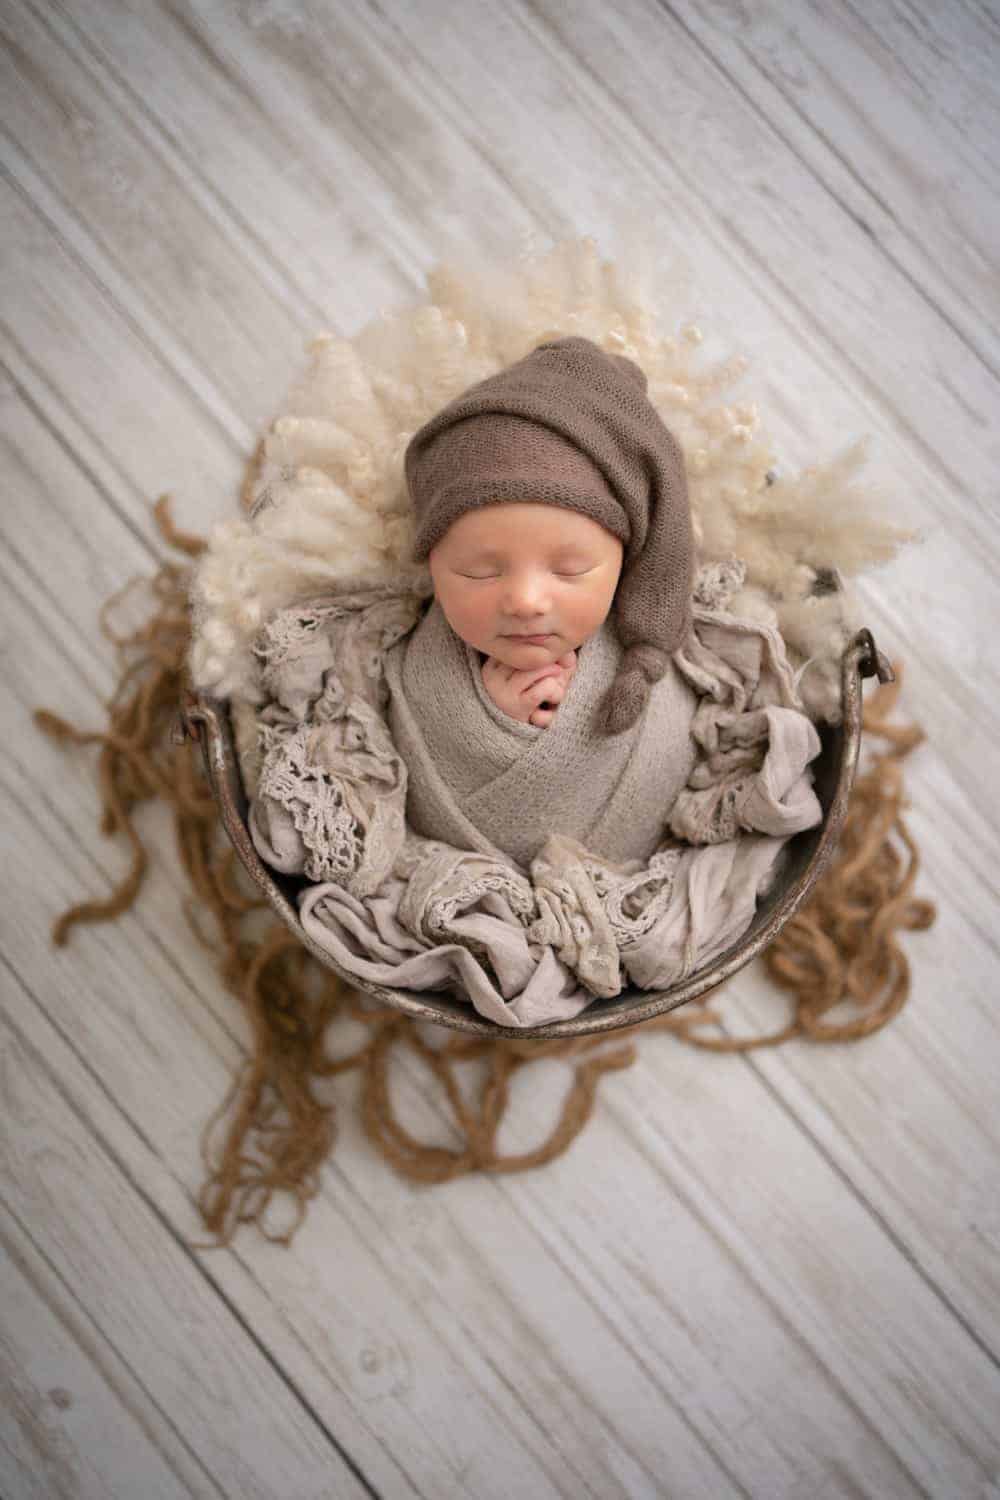 photoshoot for baby singapore newborn wrapped around a brown blanket and placed in basket